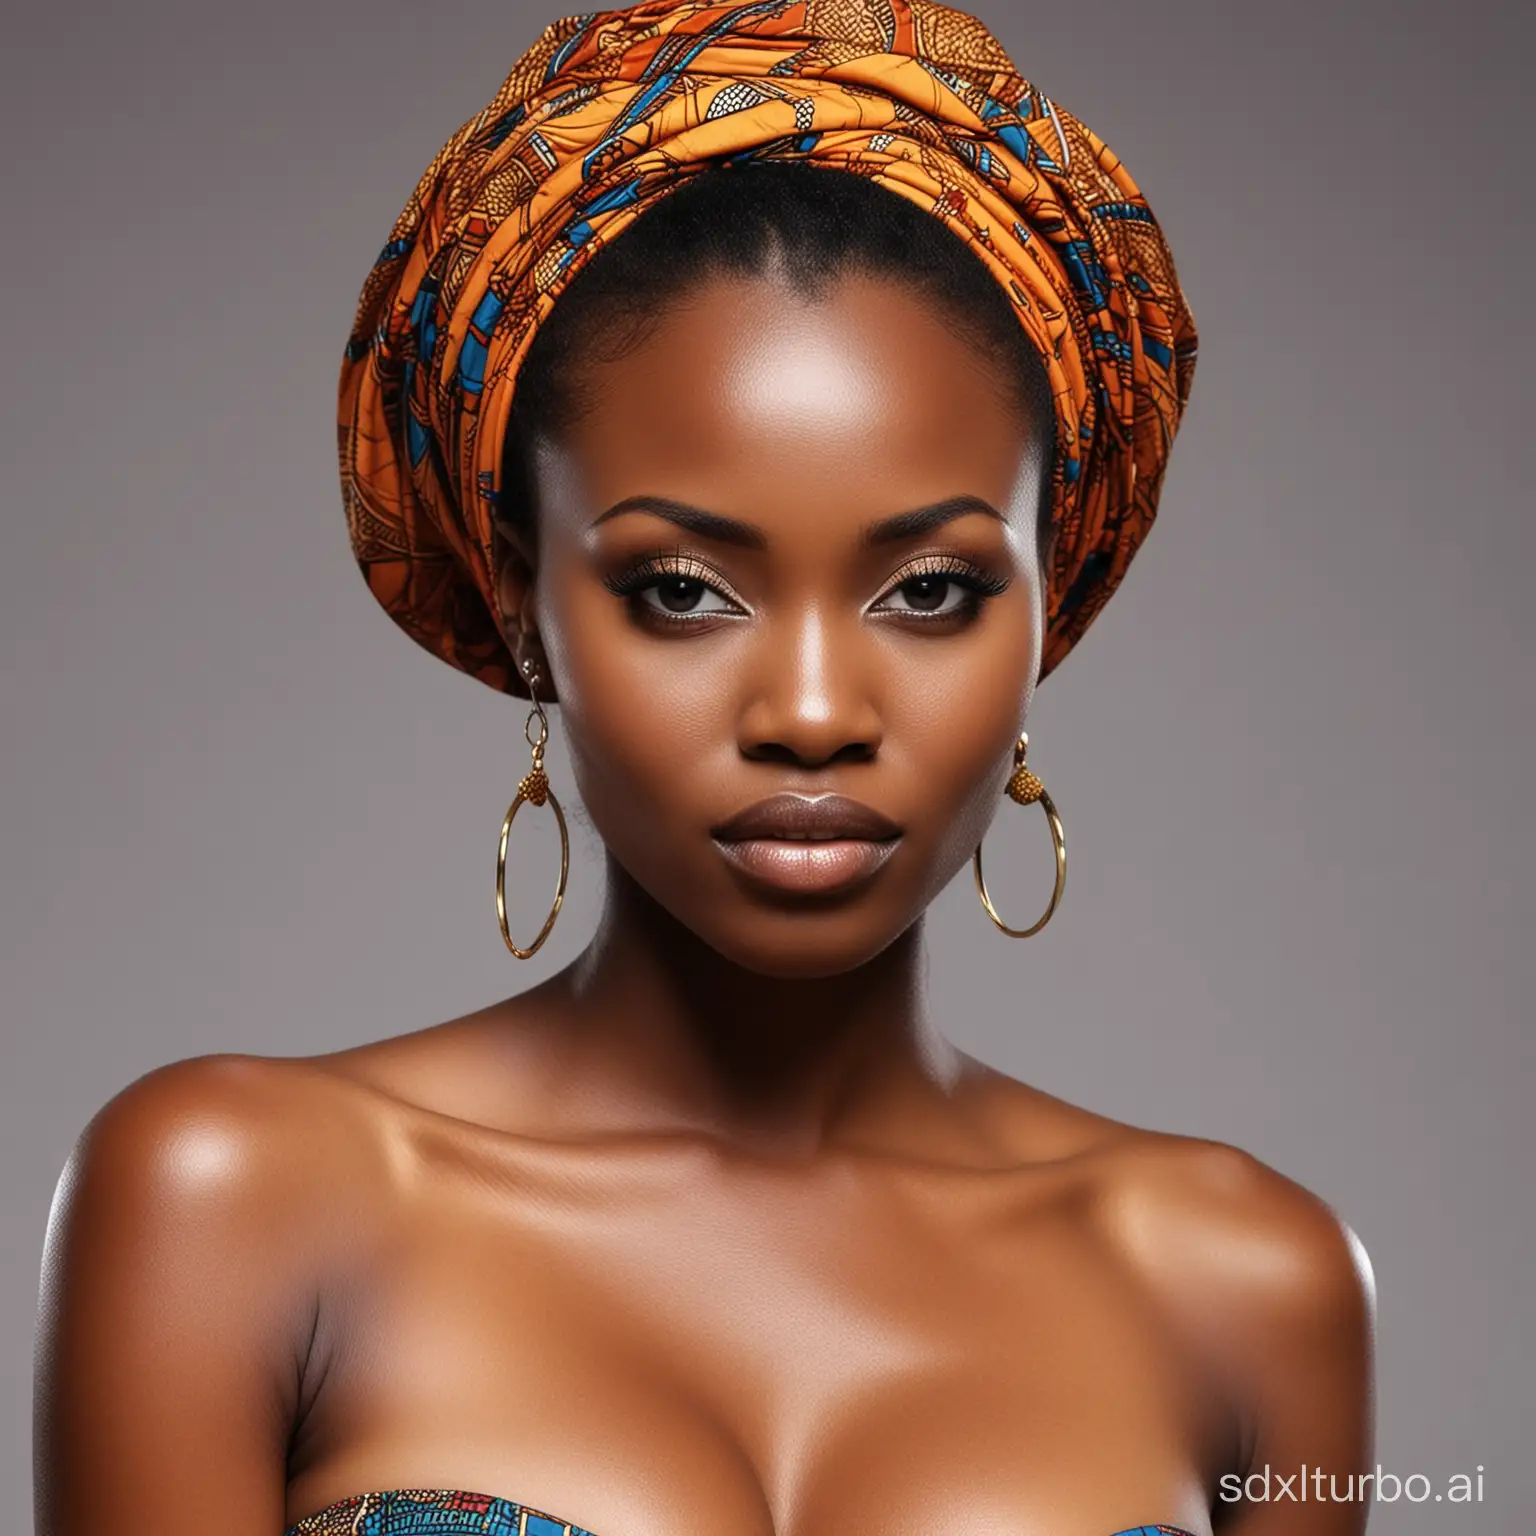 Hot African woman